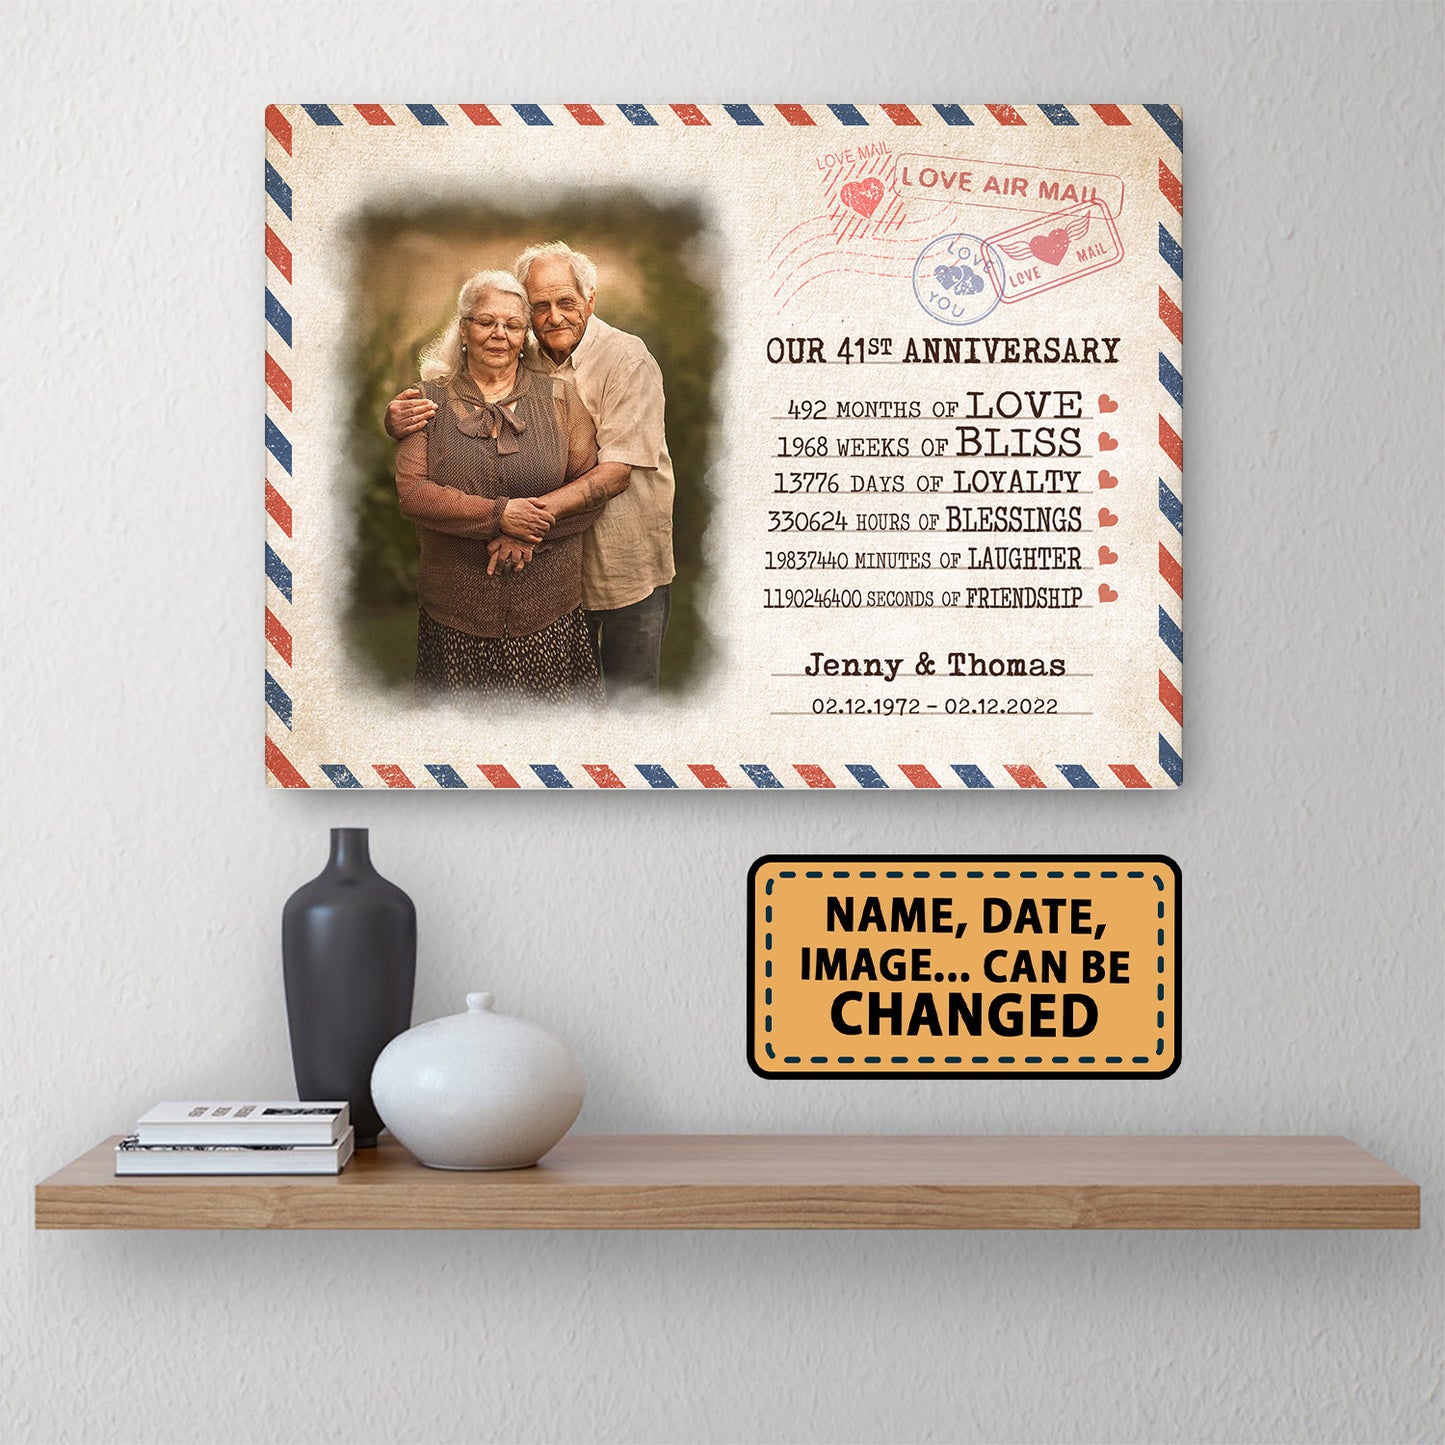 Our 41st Anniversary Letter Valentine Gift Personalized Canvas